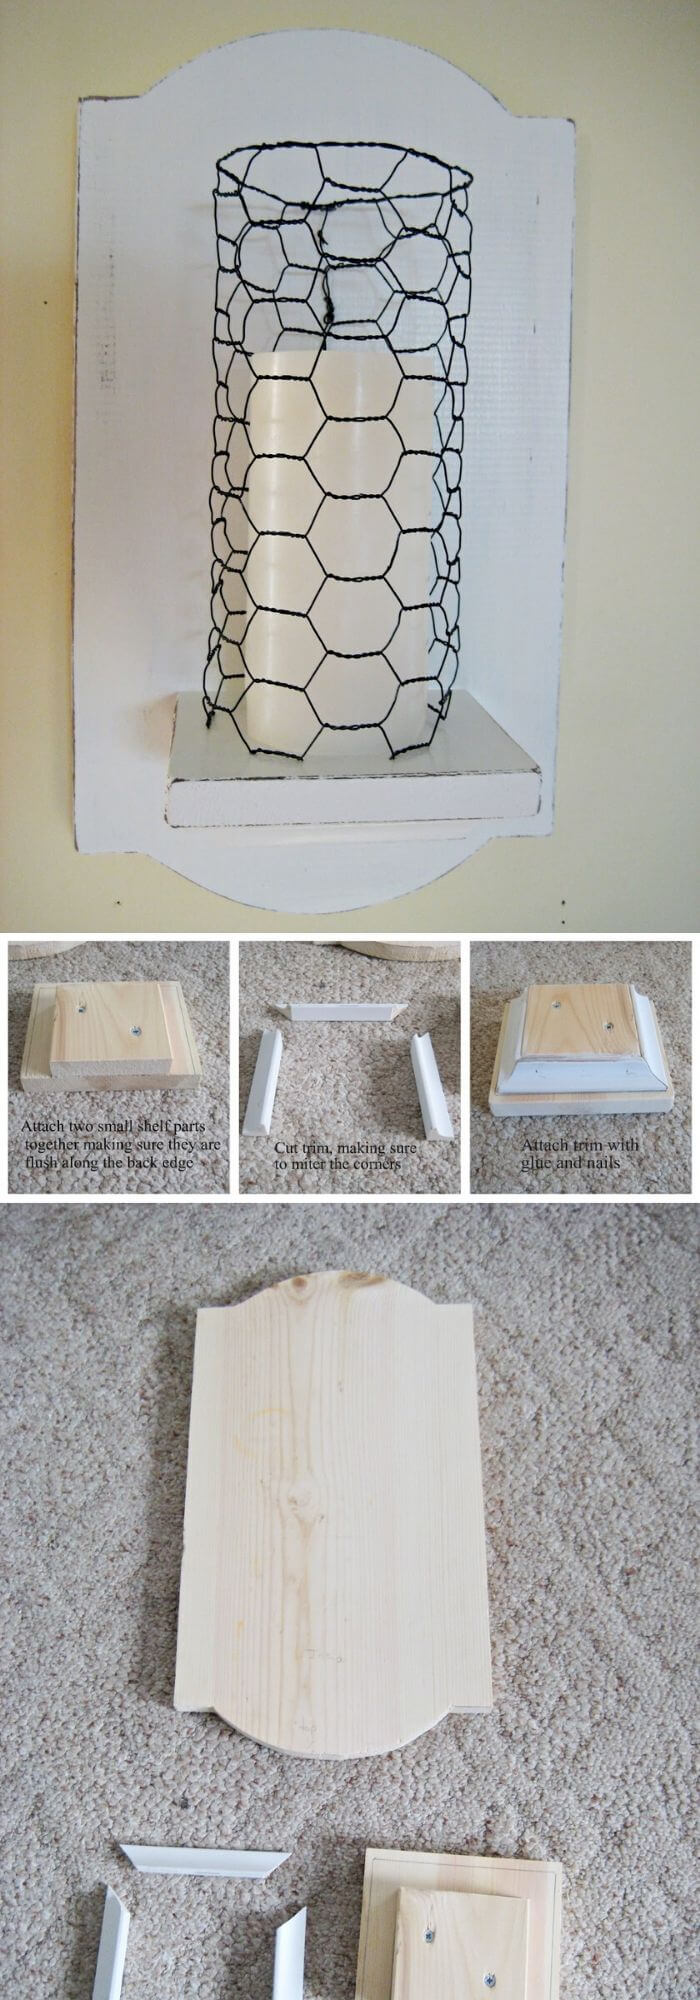 14 chicken wire projects